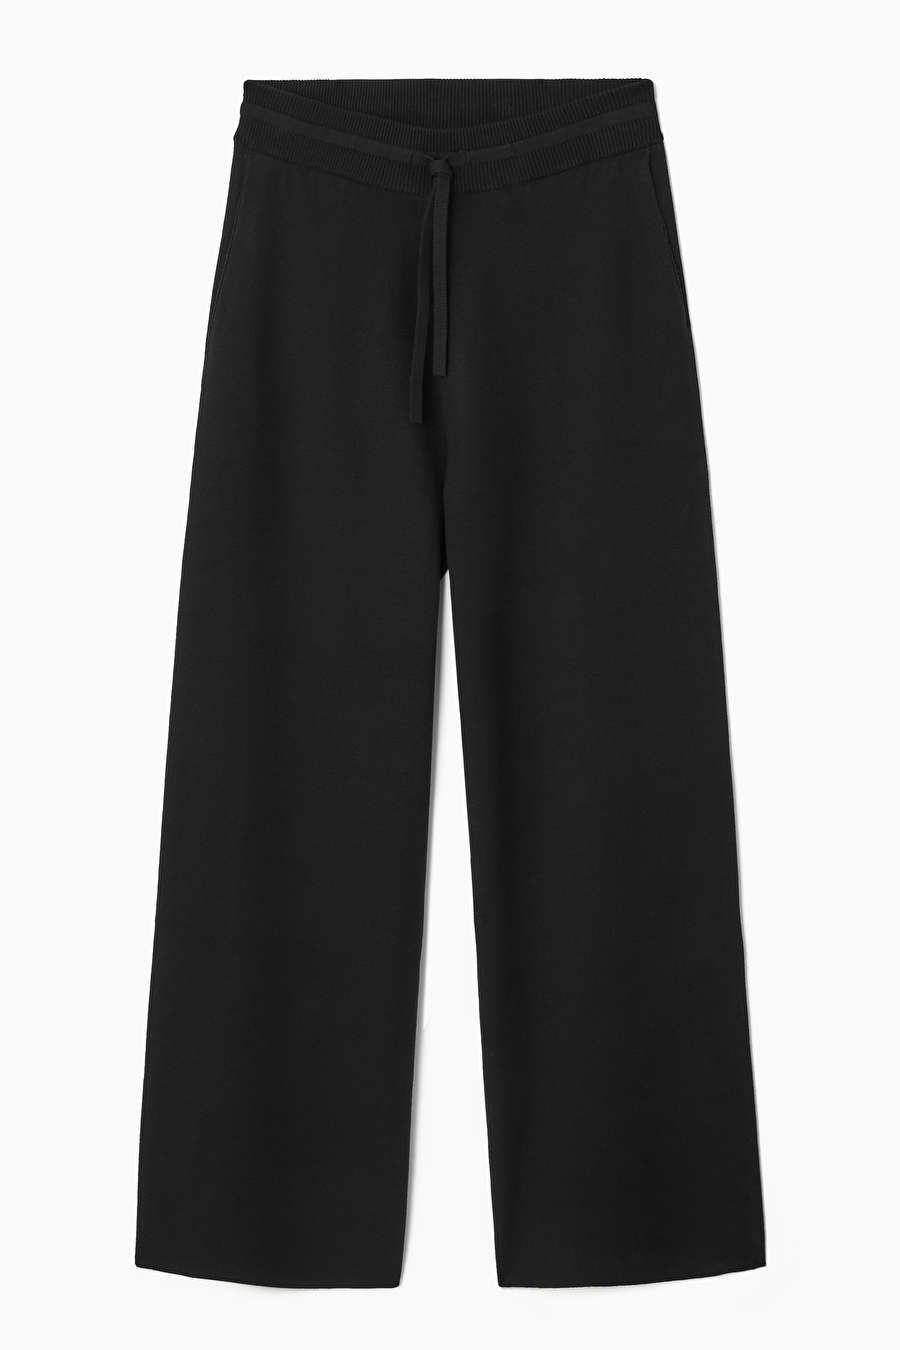 DOUBLE-FACED KNITTED JOGGERS - BLACK - COS | COS UK